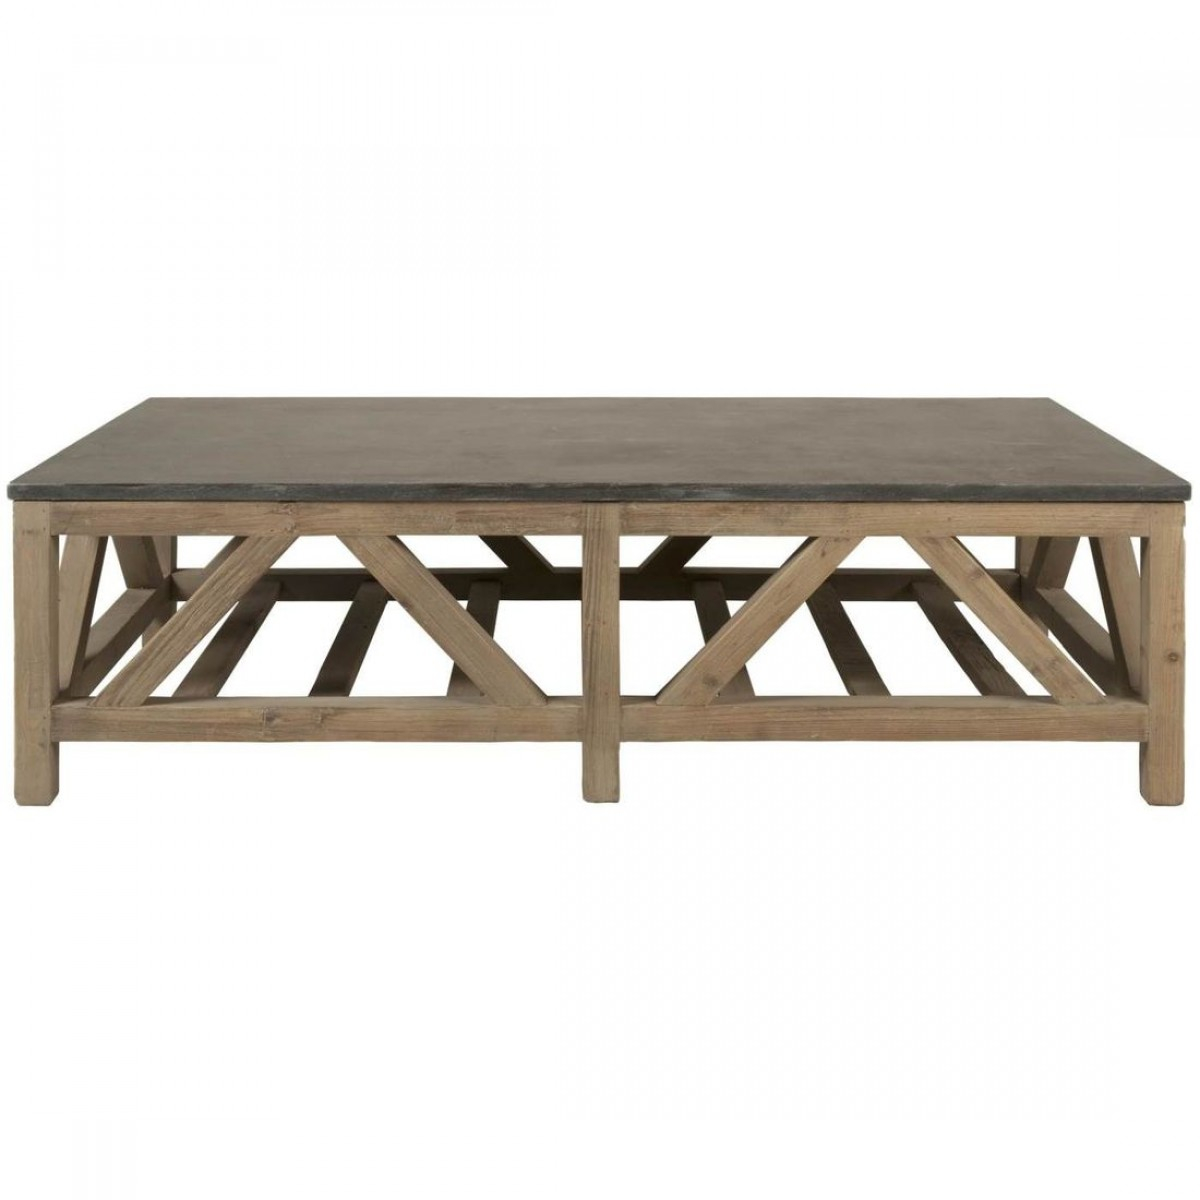 Orient Express Bella Antique Blue Stone Coffee Table In Smoke Gray Pine with regard to size 1200 X 1200